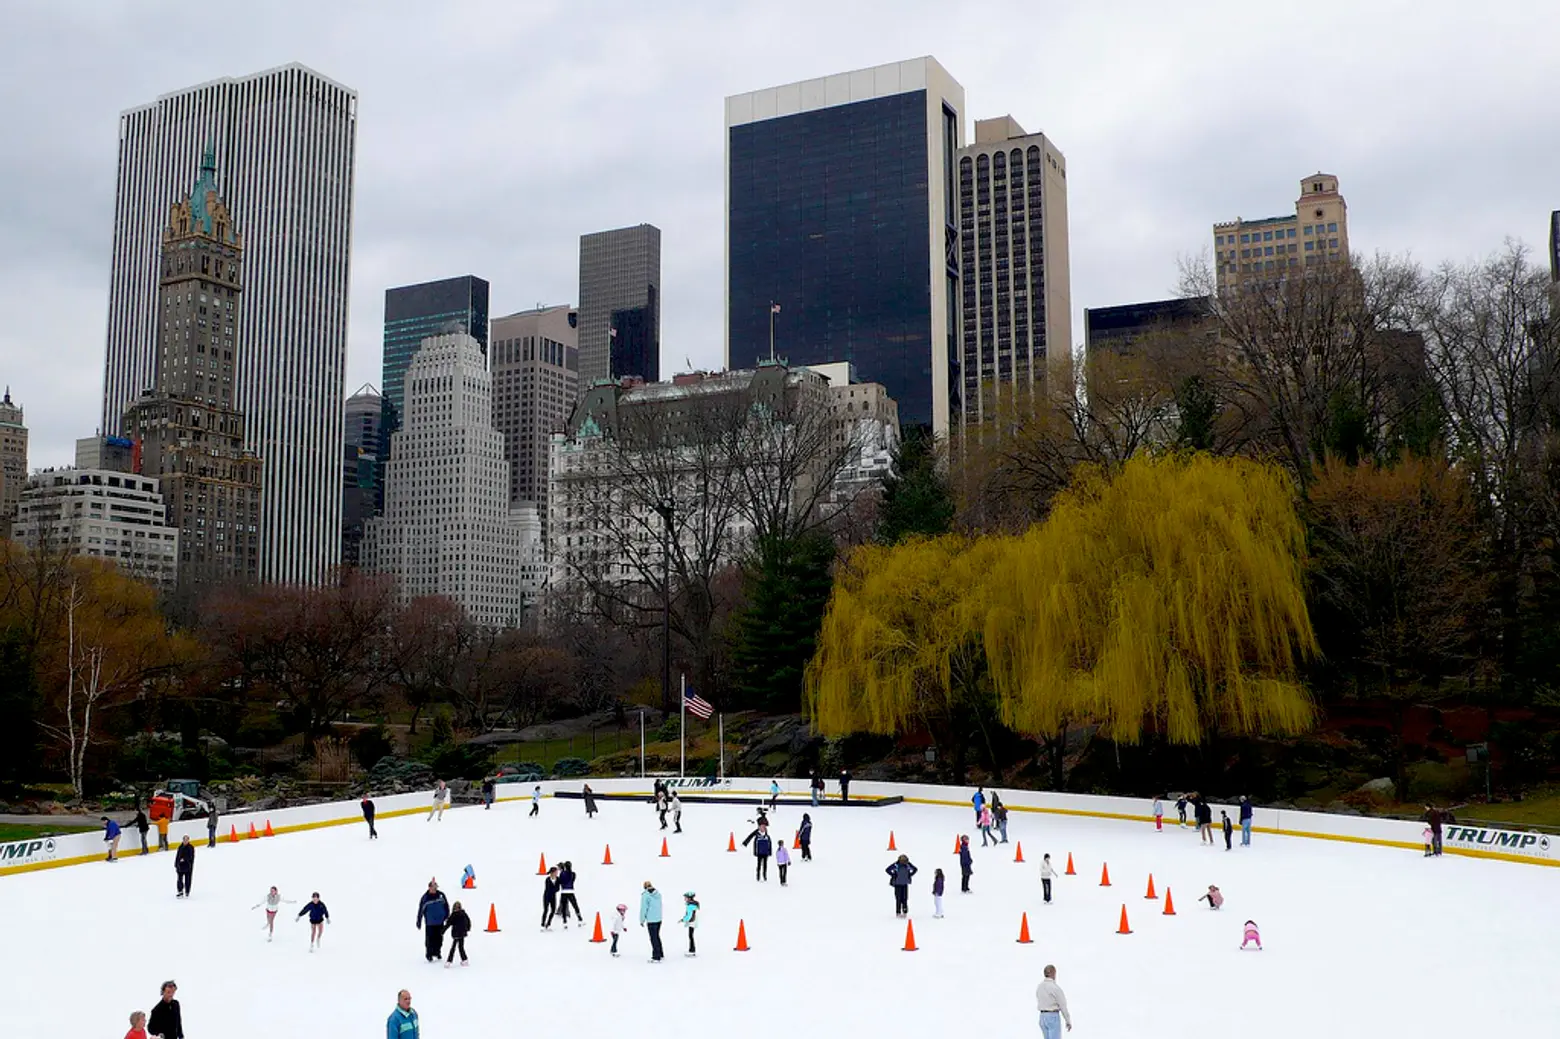 Trump-operated ice rinks in Central Park to stay open for rest of season